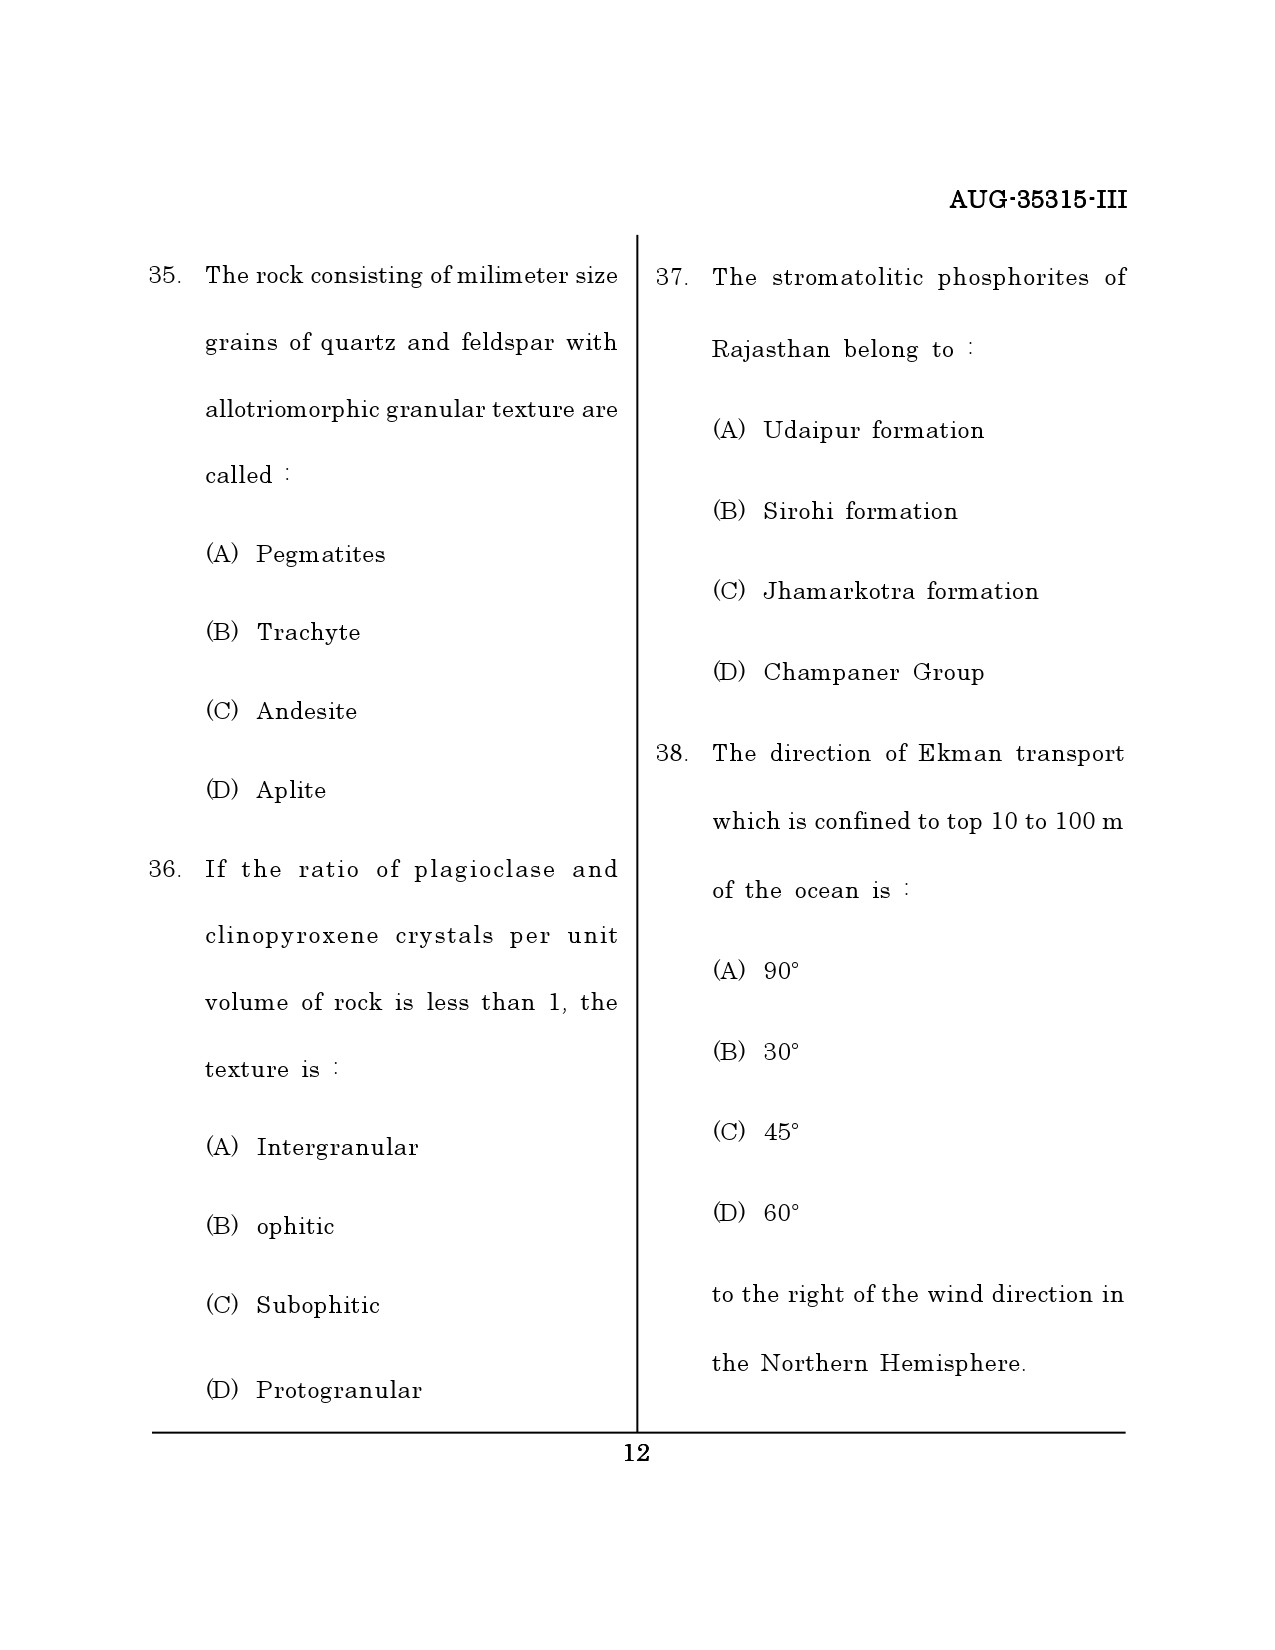 Maharashtra SET Earth Atmospheric Ocean Planetary Science Question Paper III August 2015 11